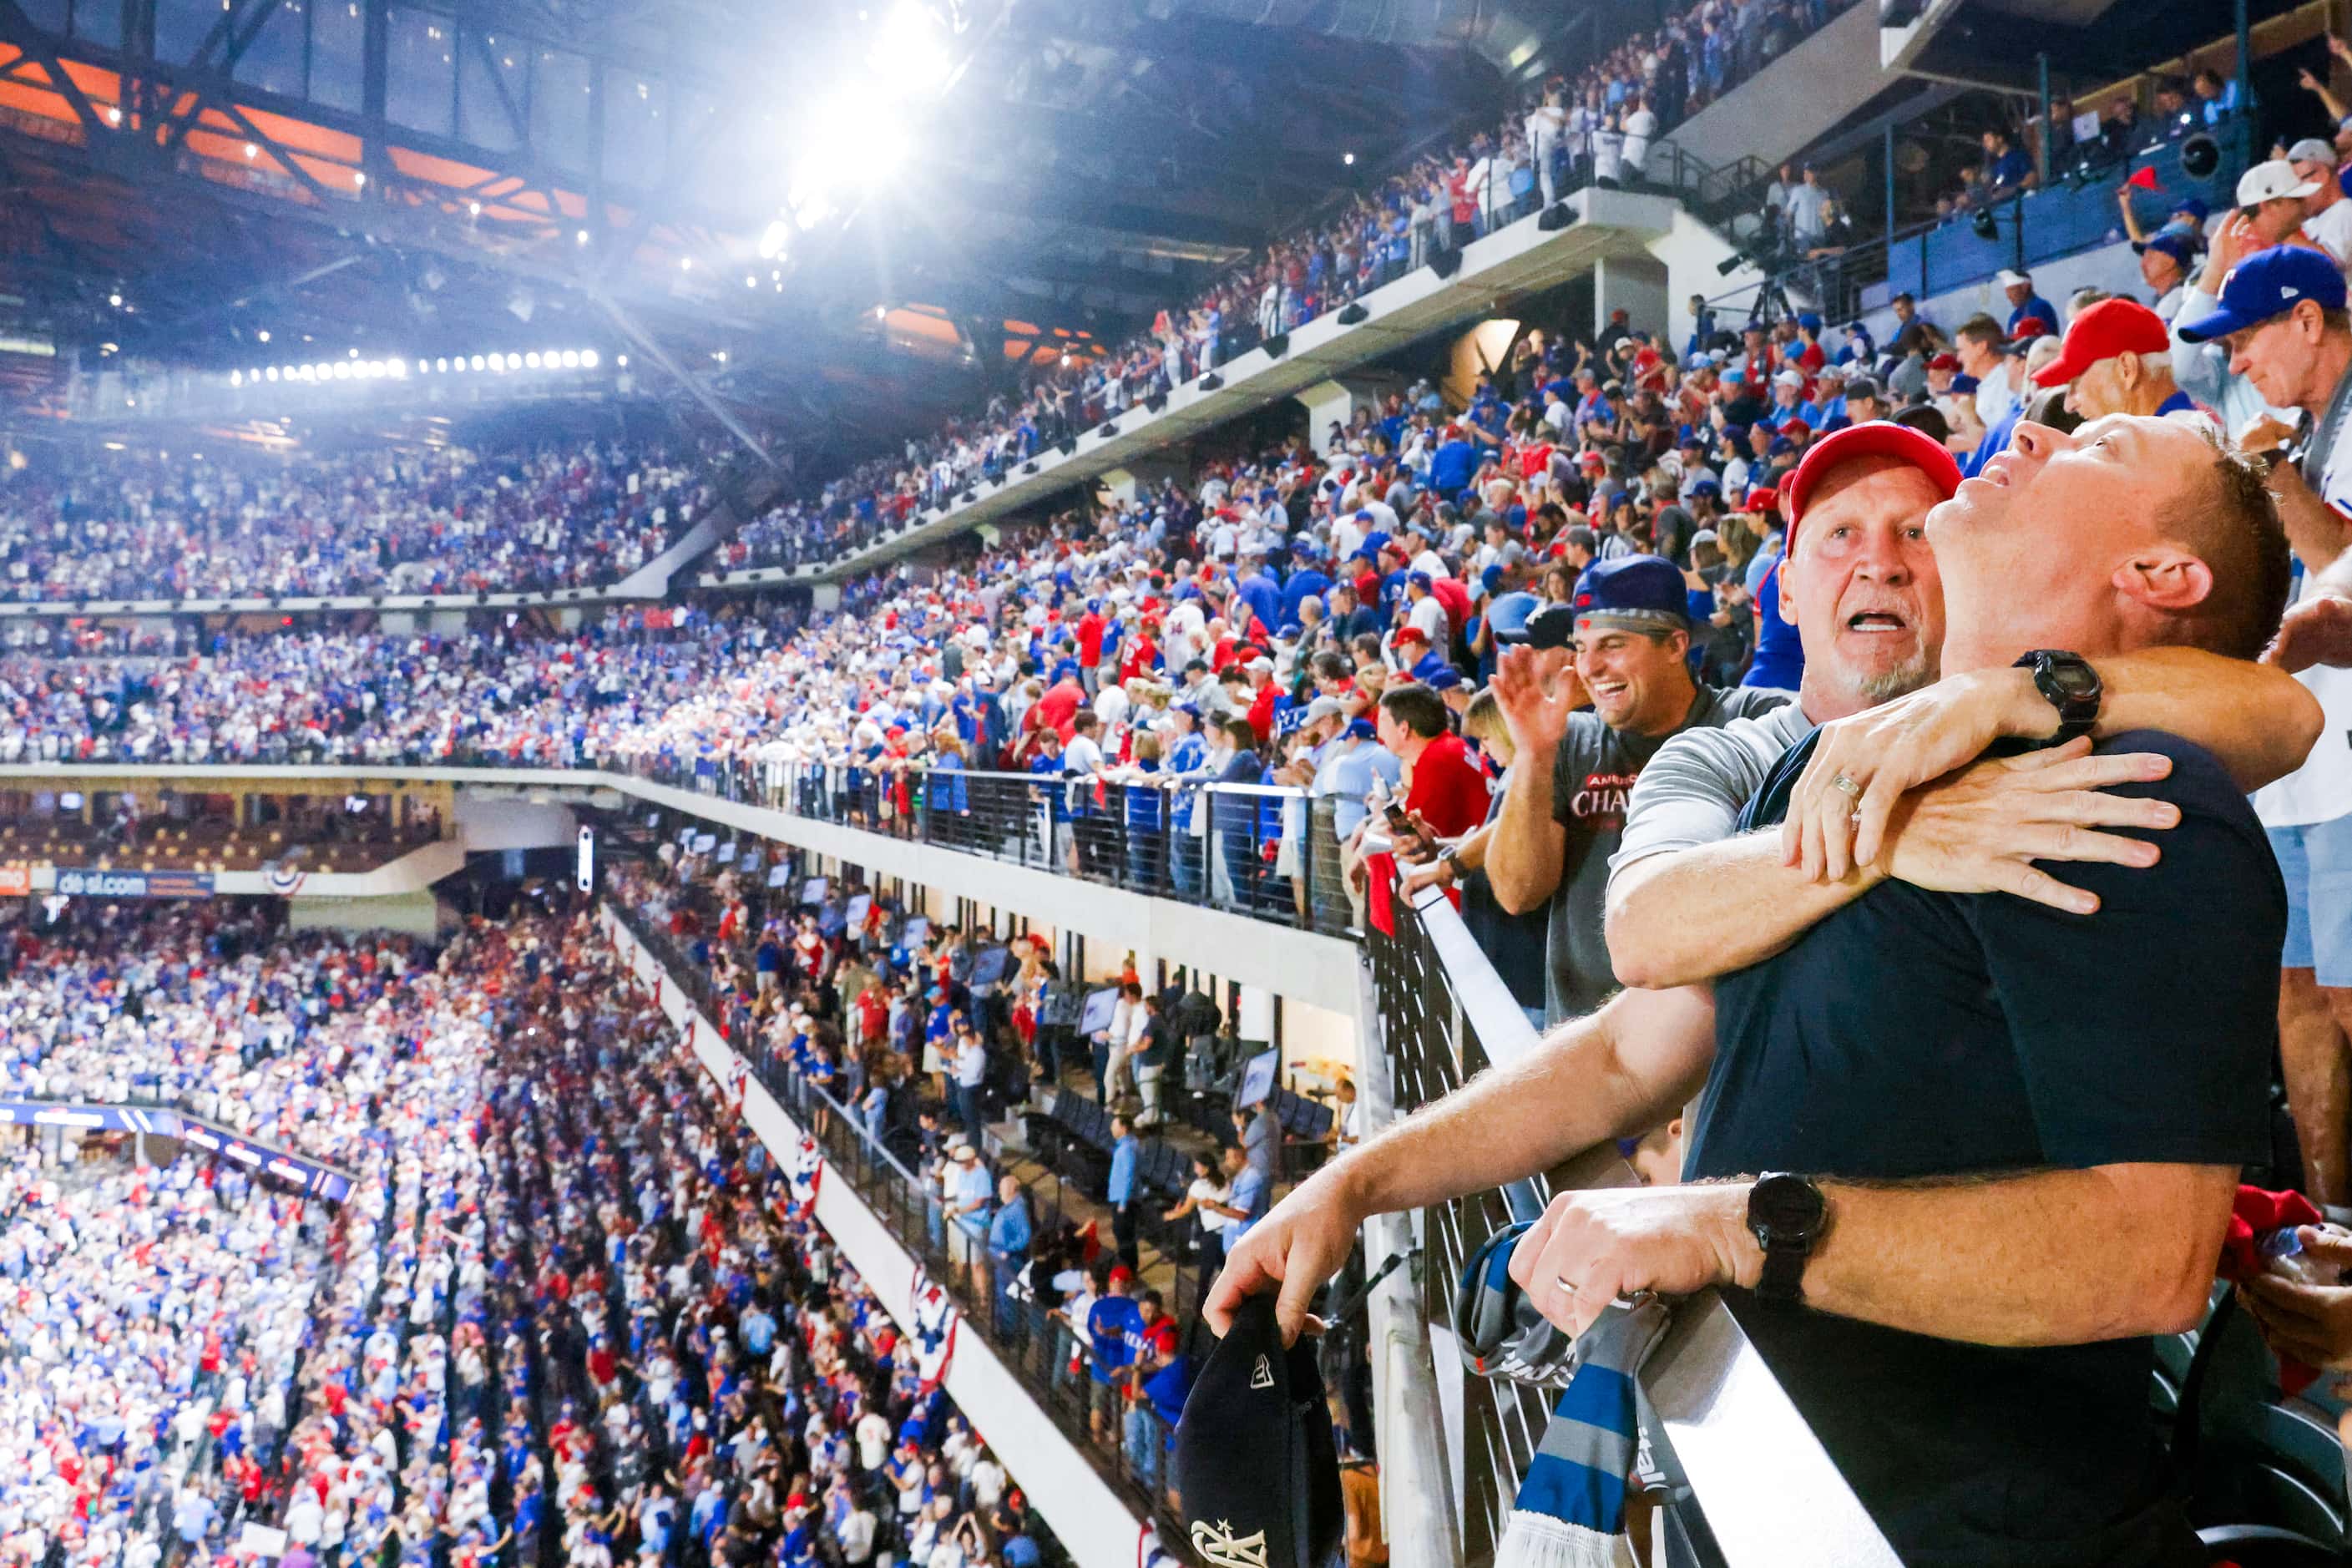 Texas Rangers fans Brian Crowley (facing) and Nick Wilhelmson react after Adolis Garcia’s...